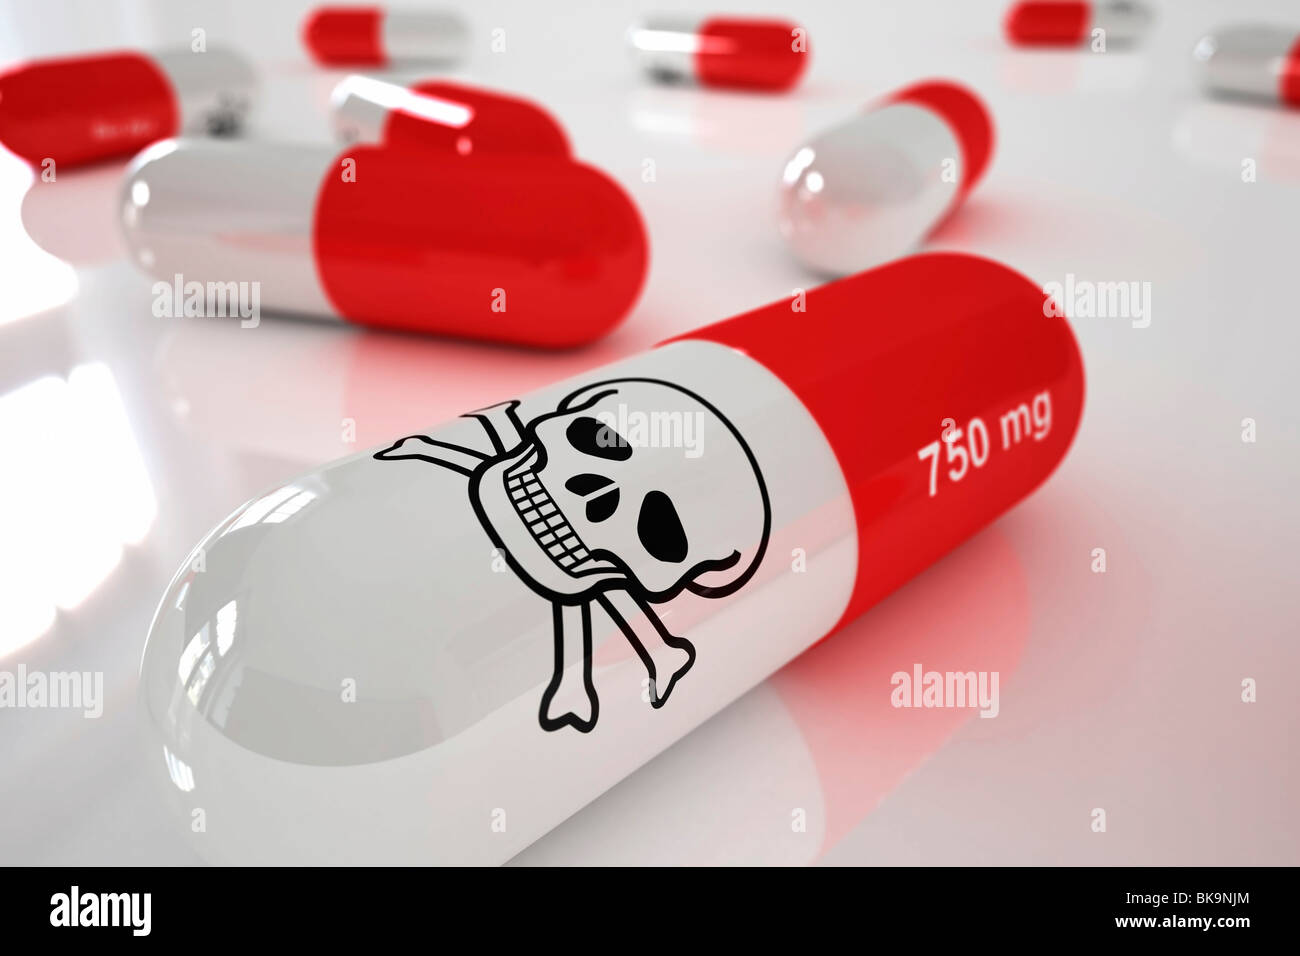 Deadly medication, concept for overdose or abuse of drugs Stock Photo